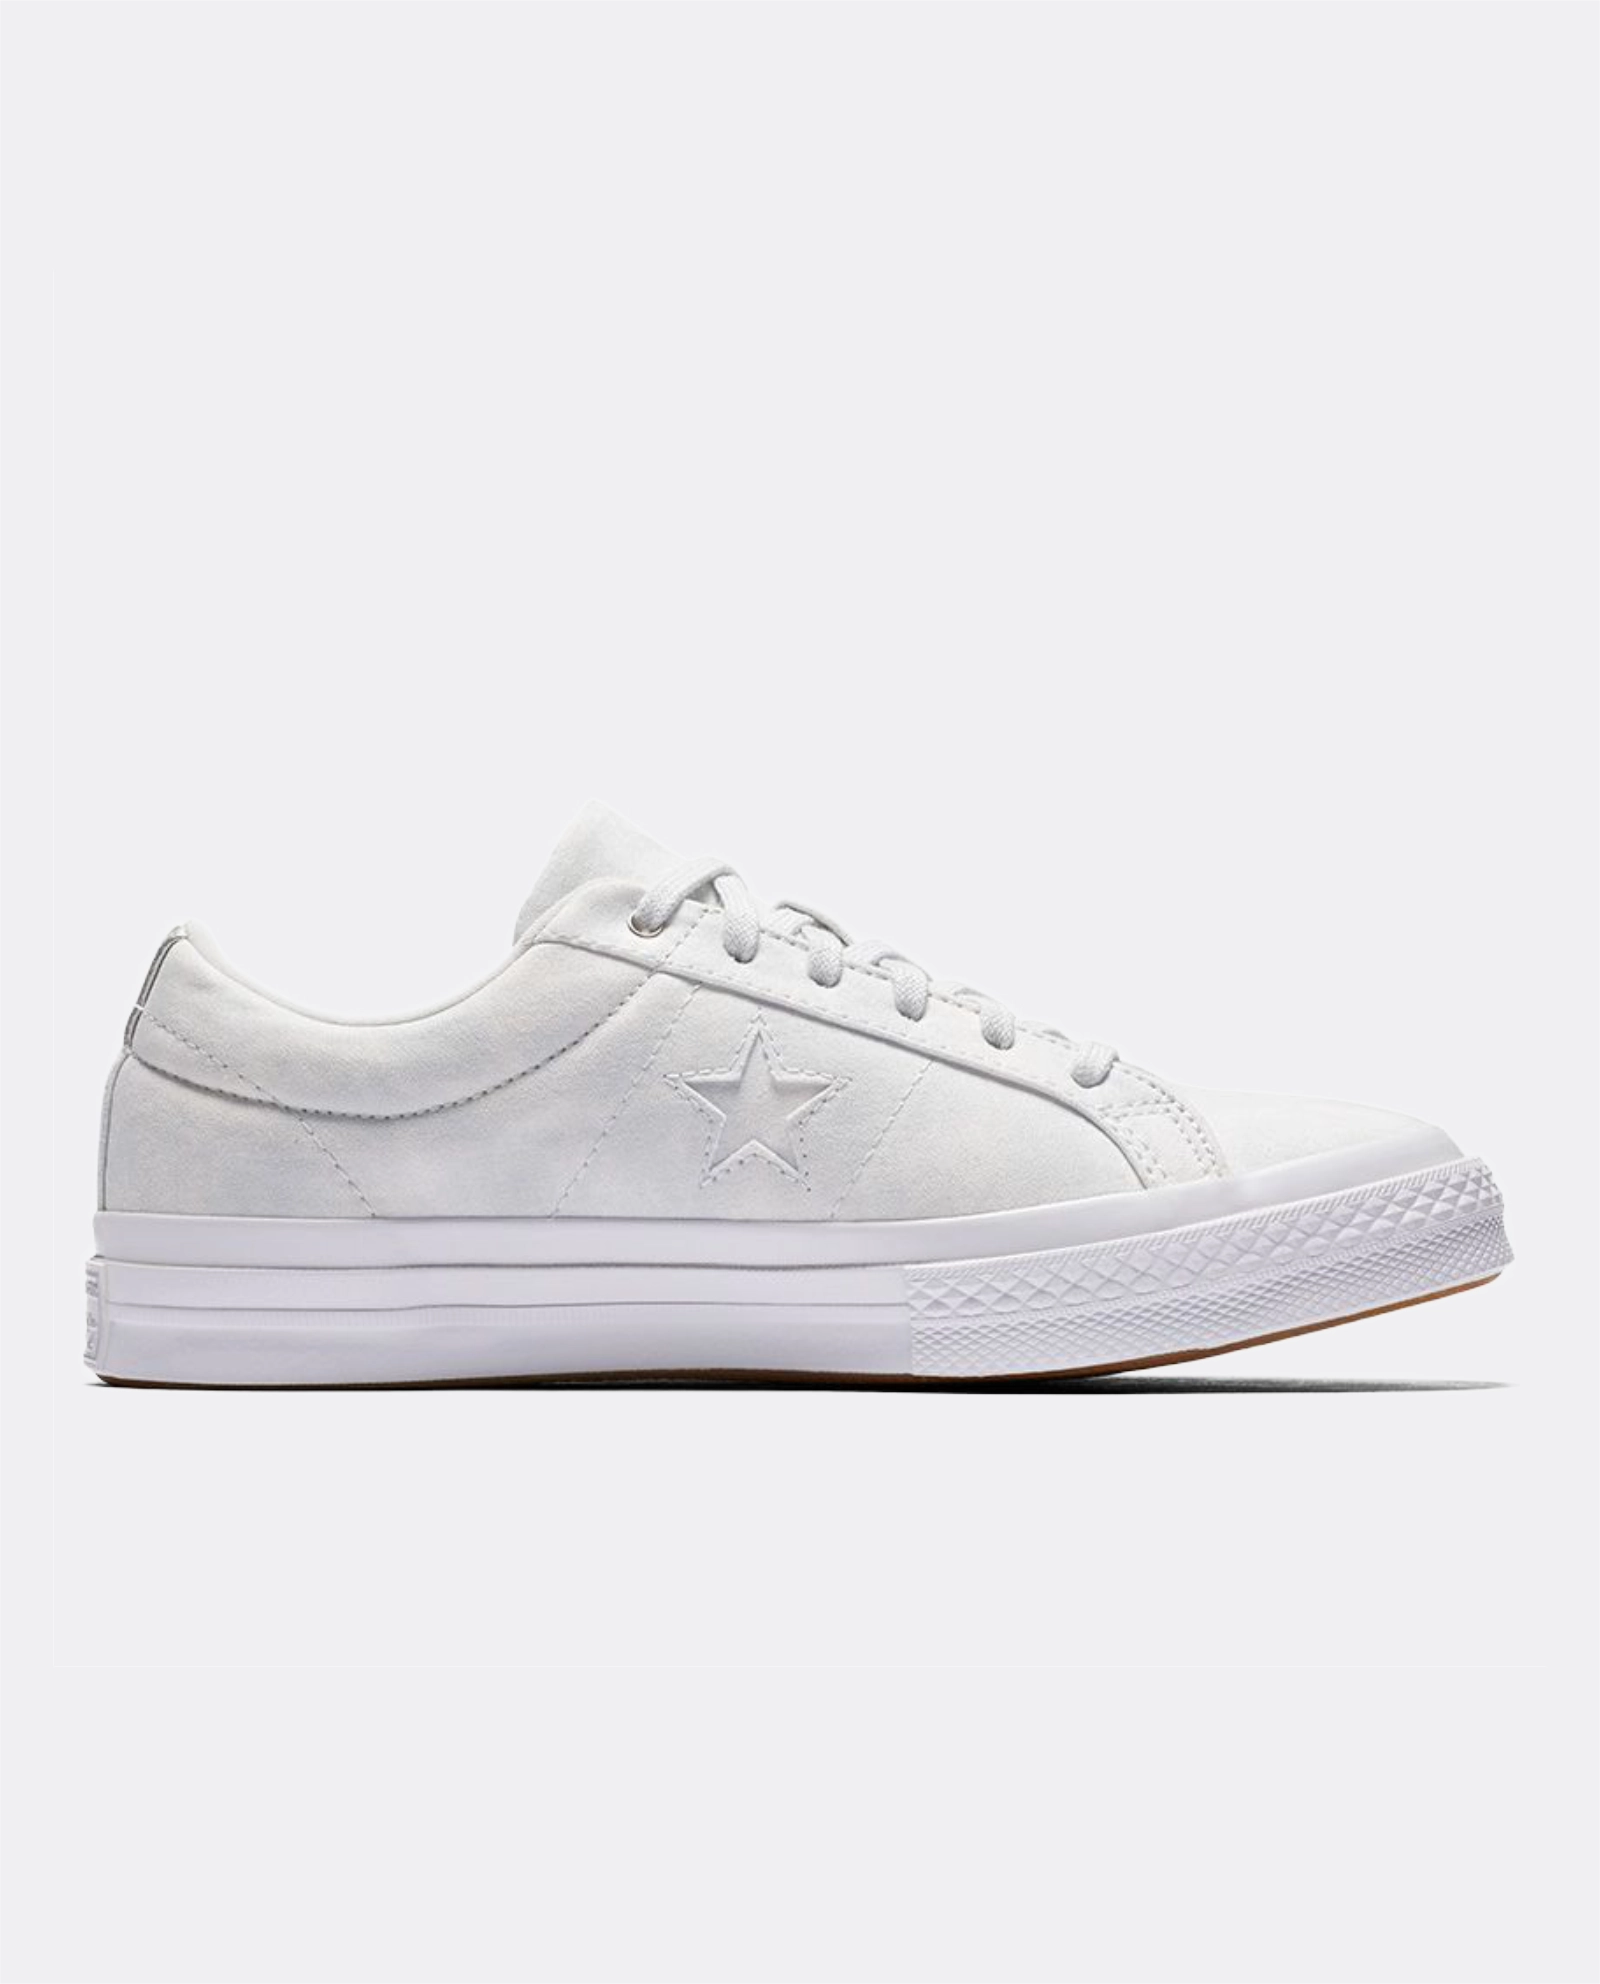 Converse One Star Shoelace Length